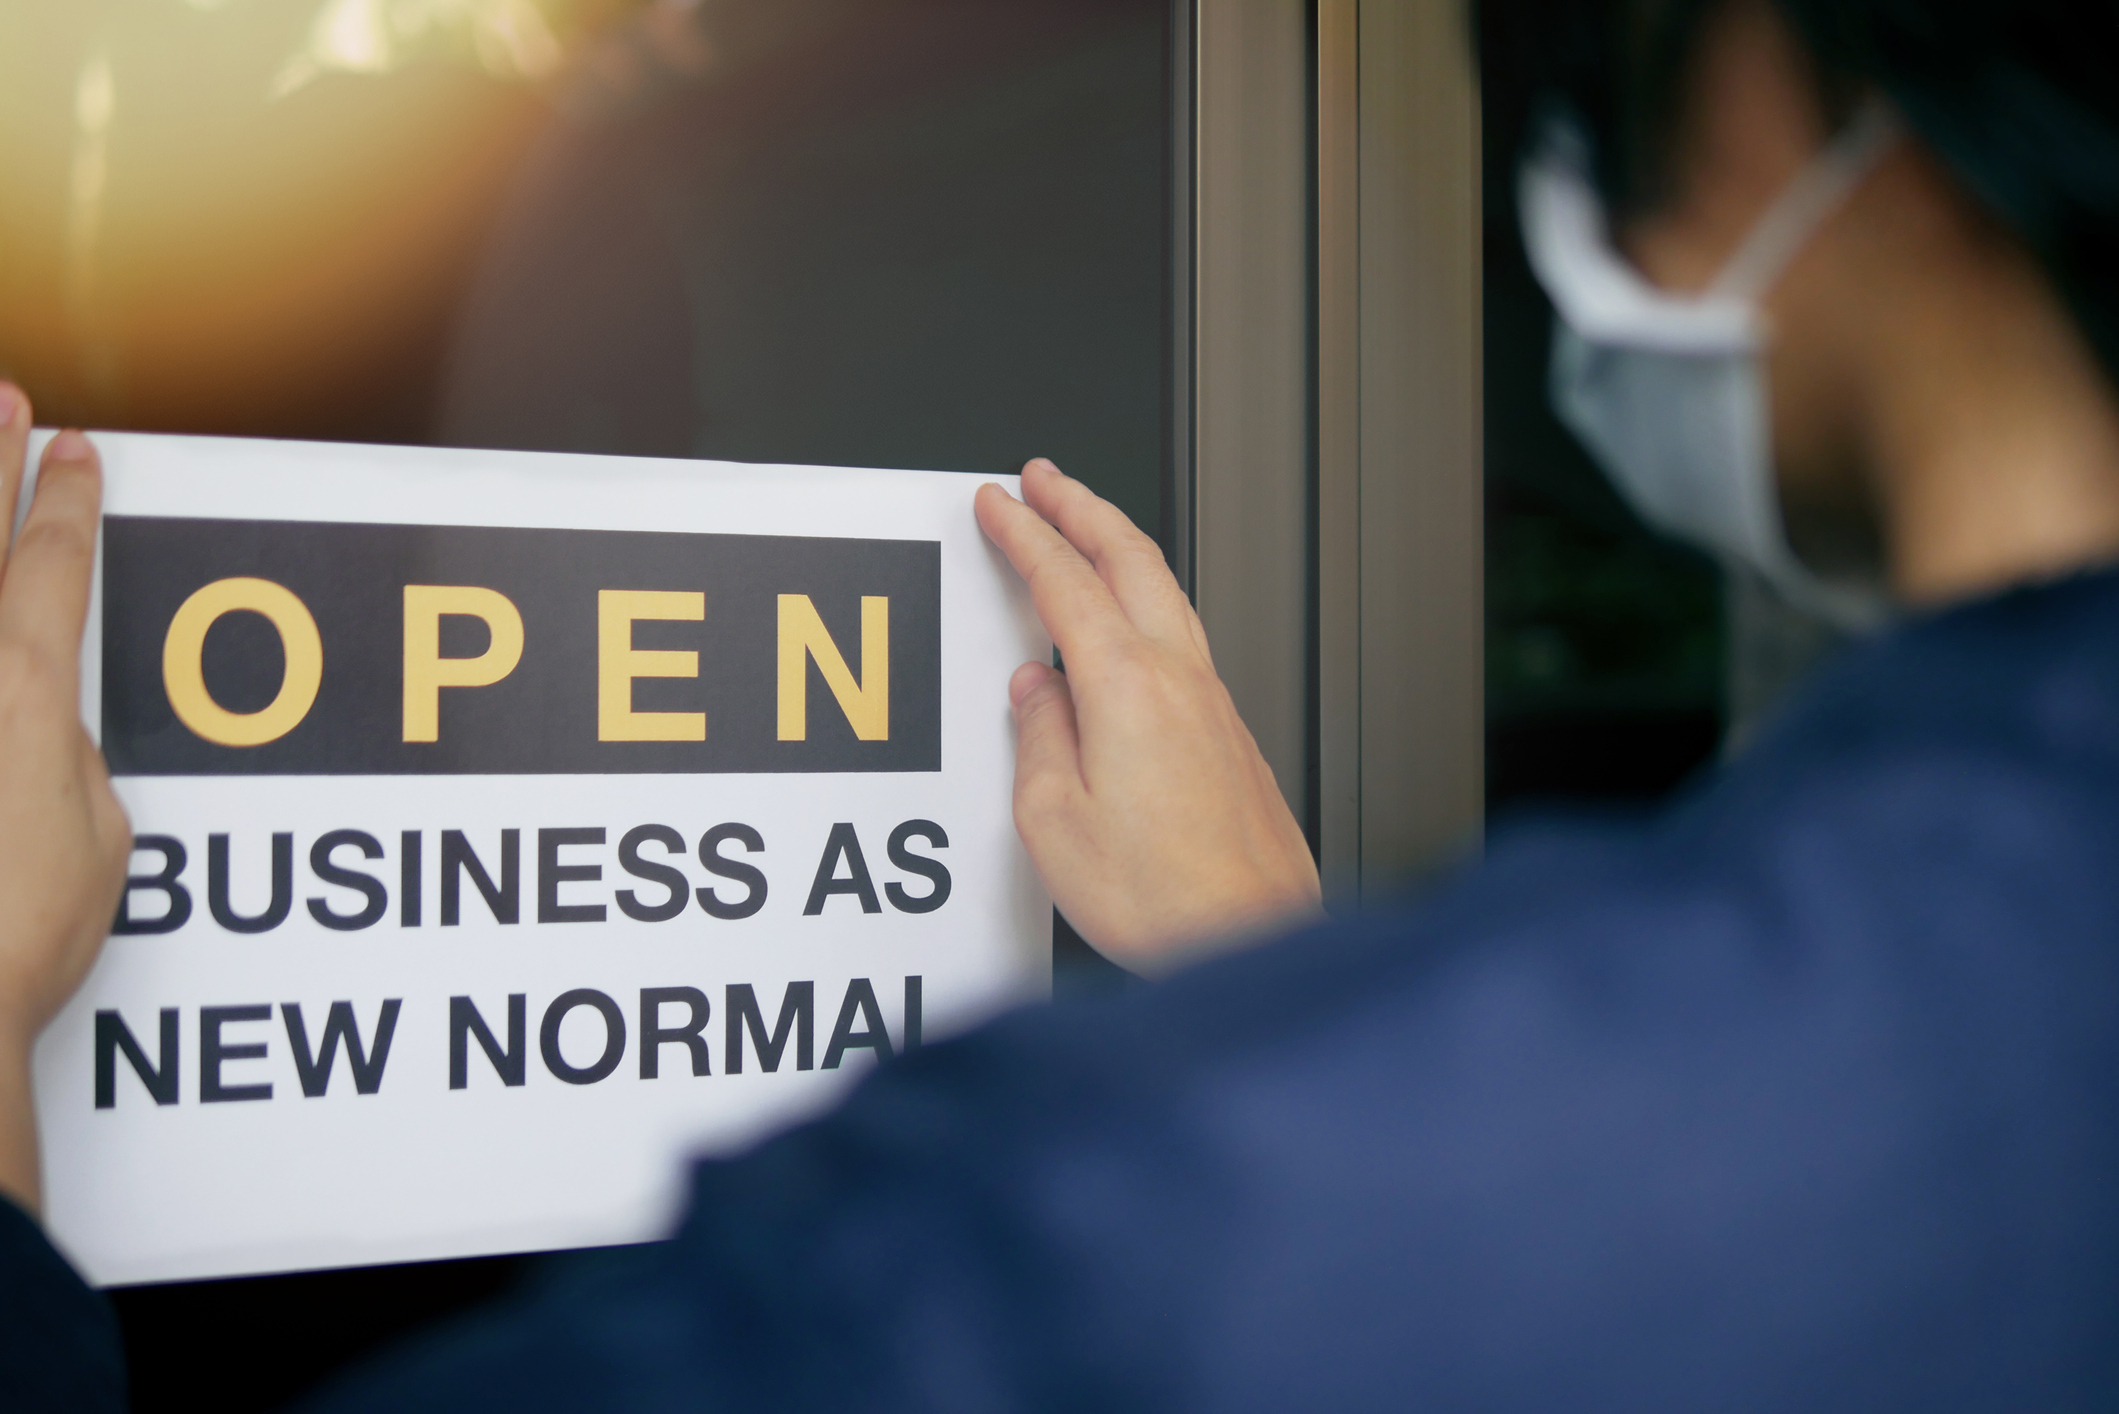 How to Support Small Businesses During the COVID19 Pandemic